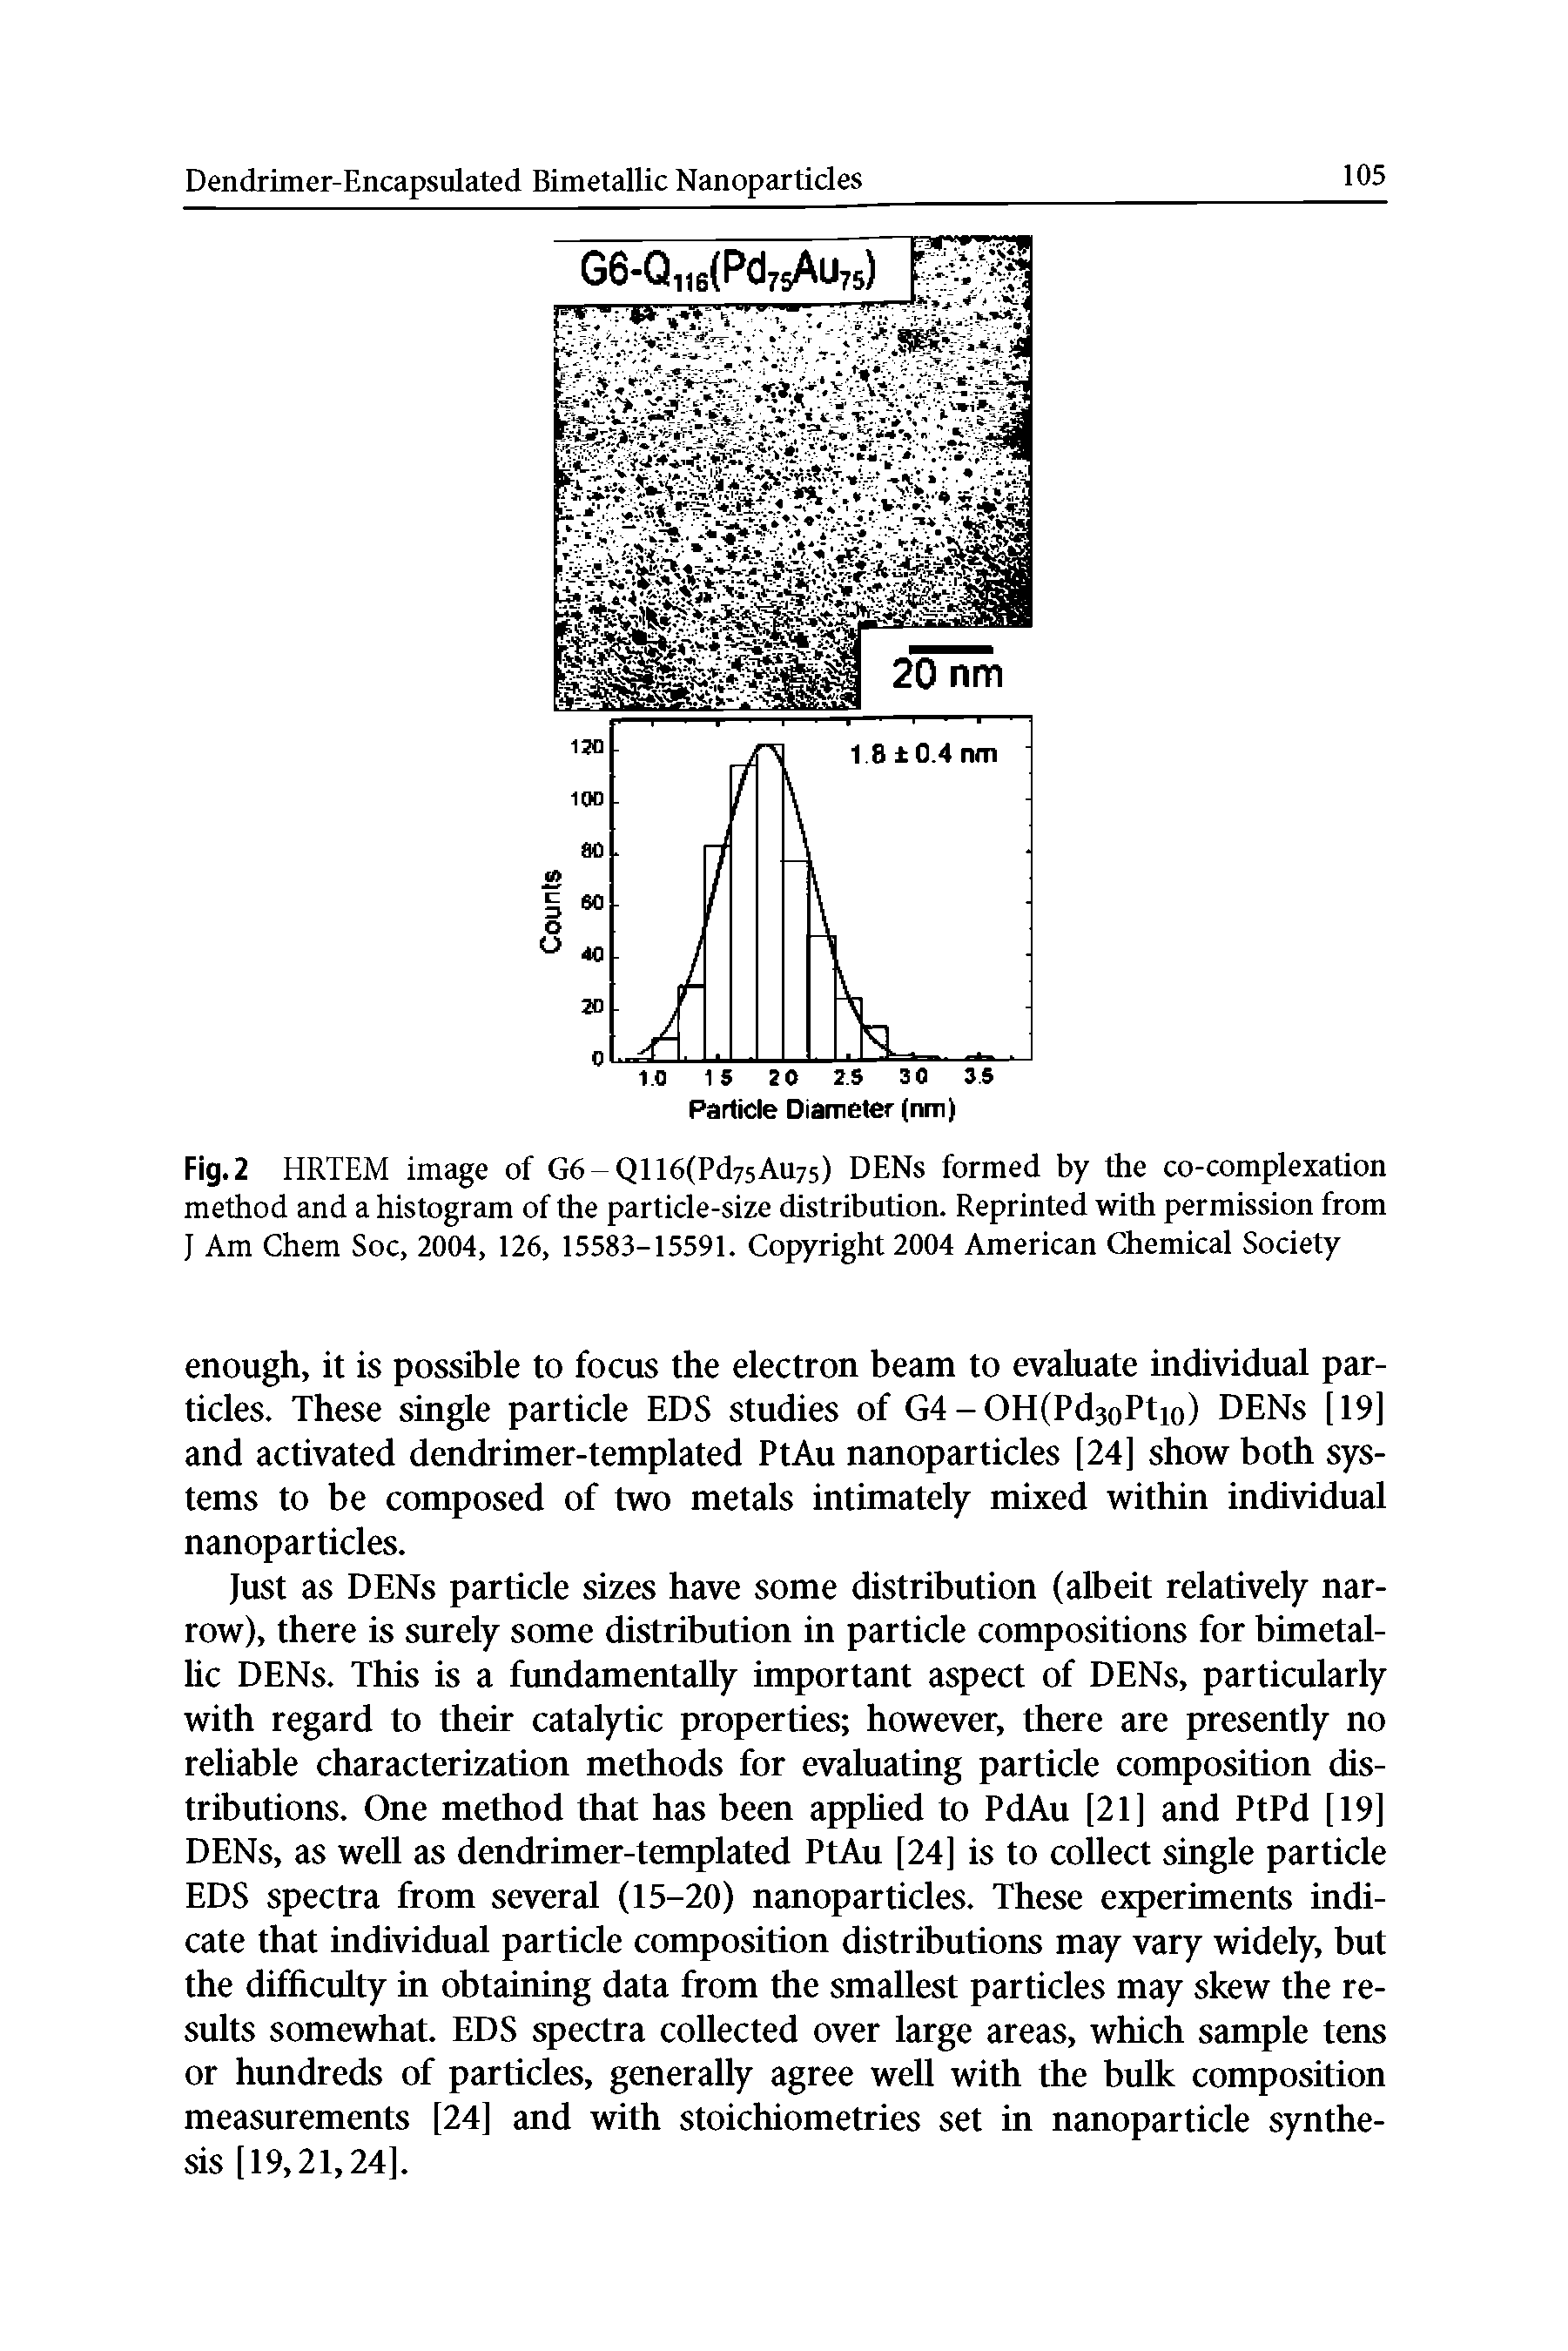 Fig. 2 HRTEM image of G6-Q116(Pd75Au75) DENs formed by the co-complexation method and a histogram of the particle-size distribution. Reprinted with permission from J Am Chem Soc, 2004, 126, 15583-15591. Copyright 2004 American Chemical Society...